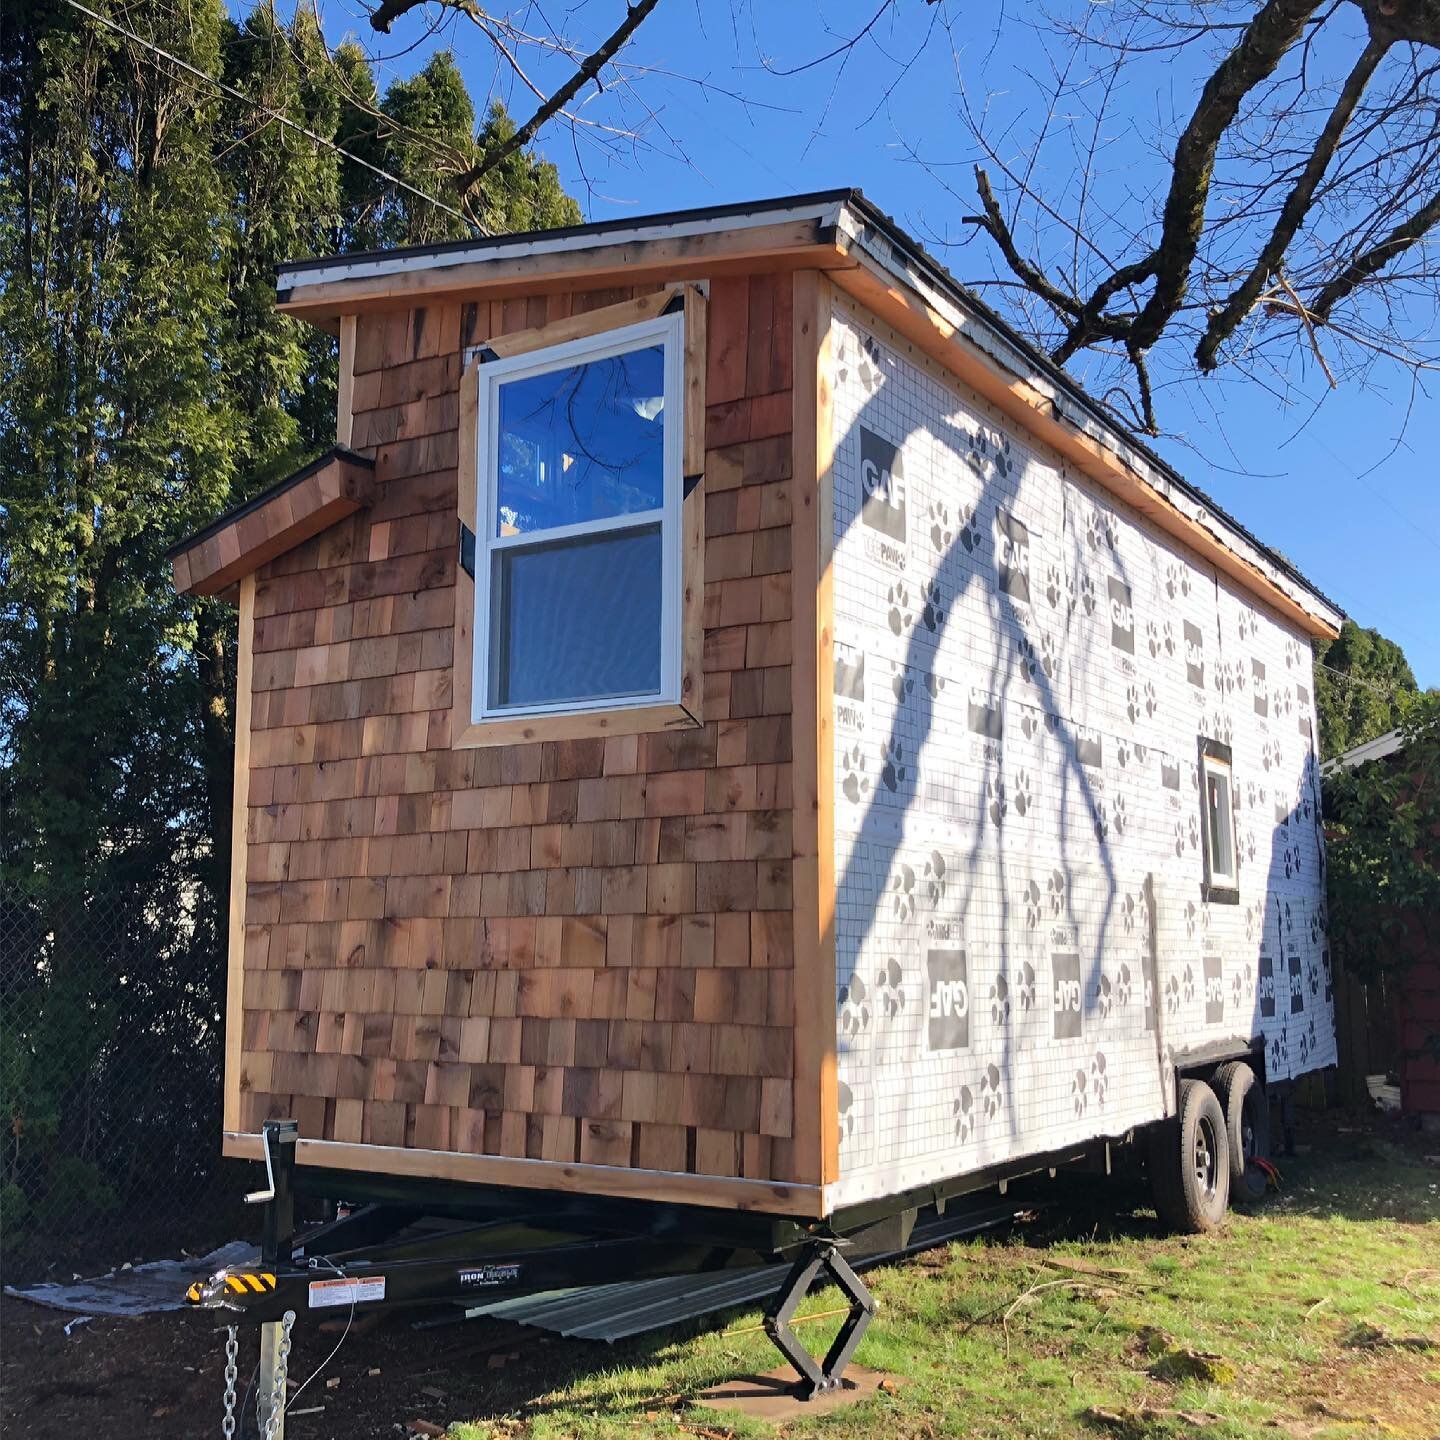 One side has been shingled! 

#tinyhouse #tinyhome #diy #cedarshakes #buildyourownhome